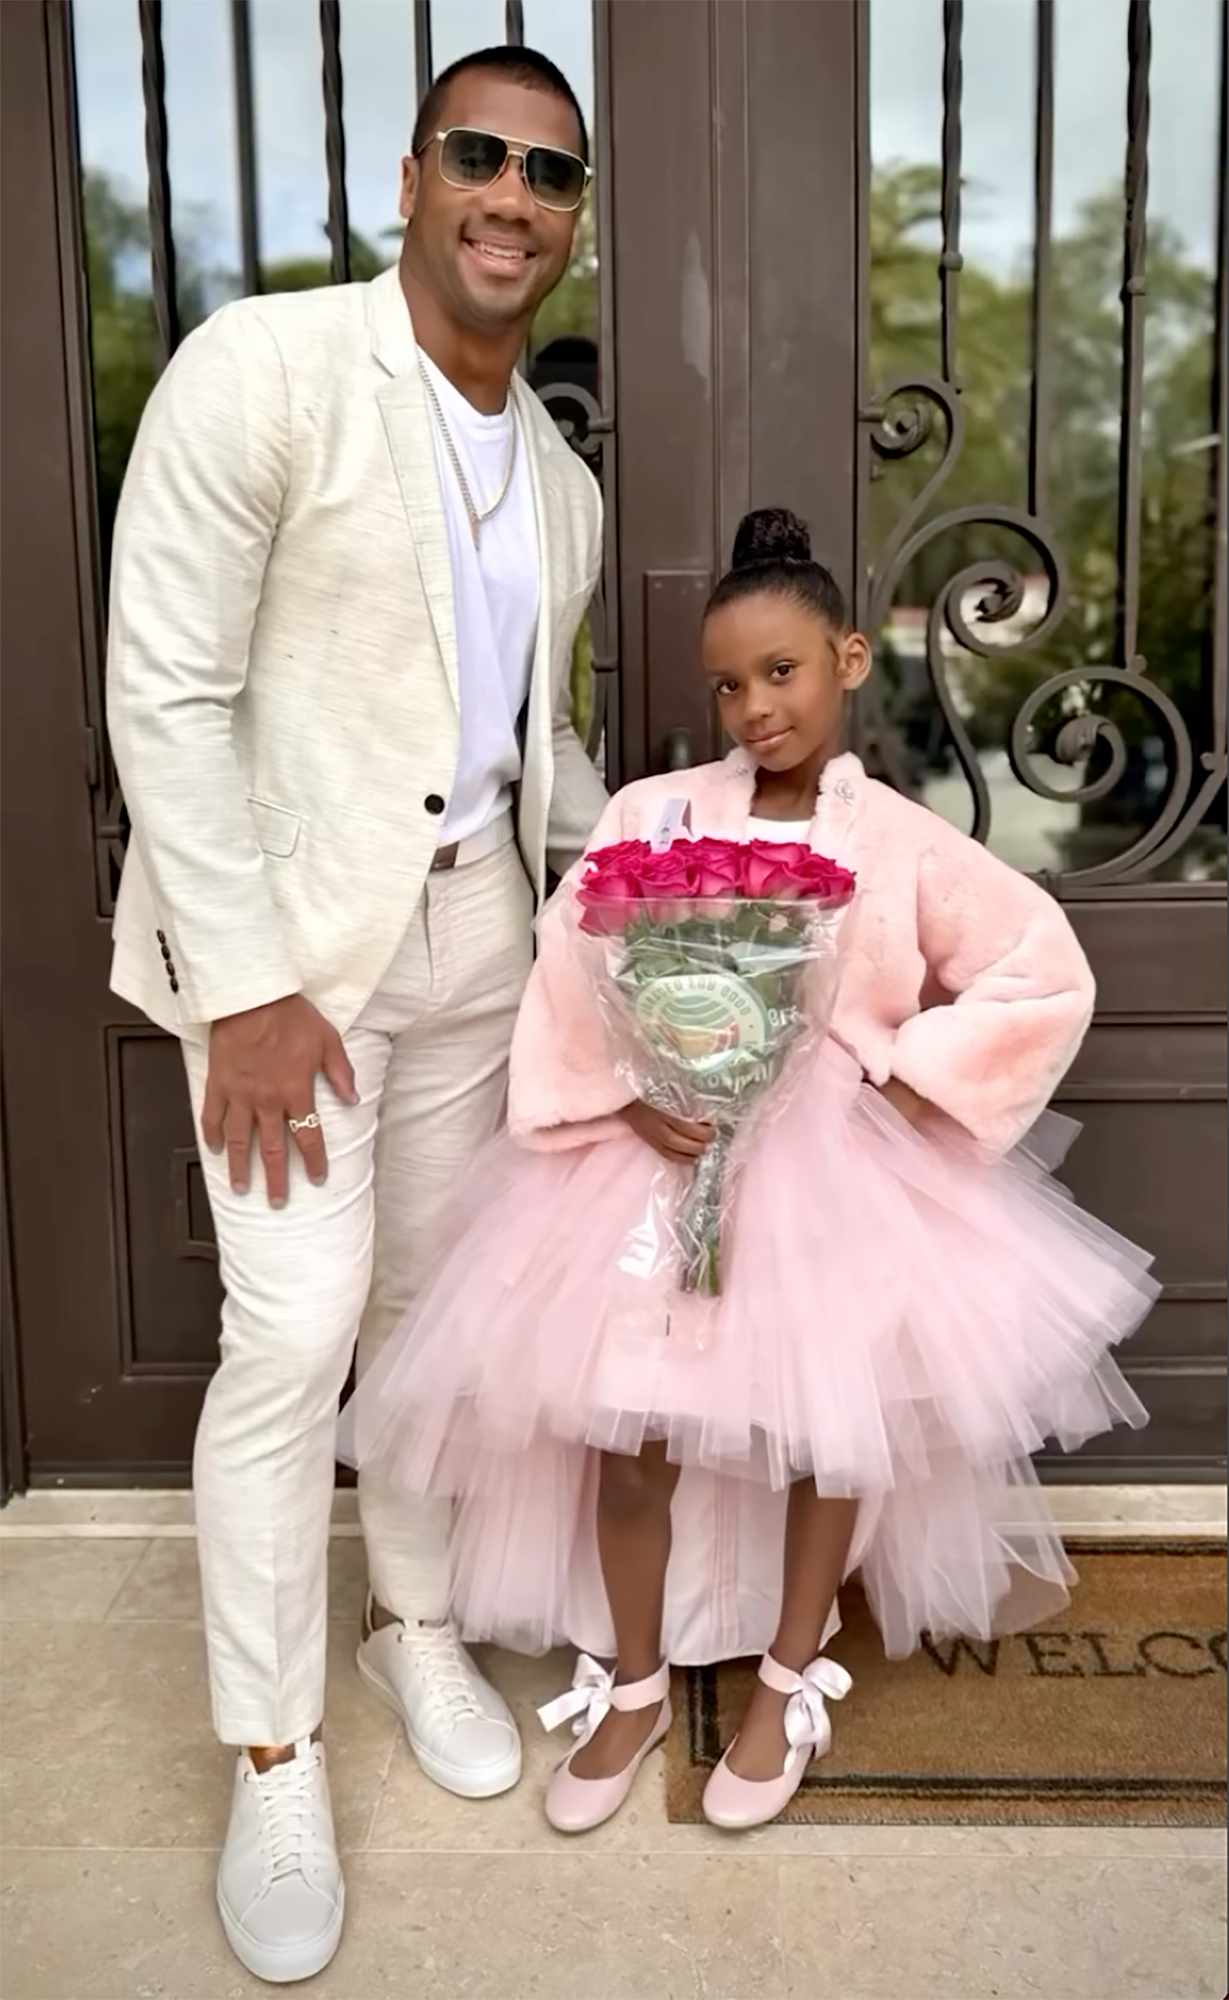 Ciara and Russell Wilsons Daughter Sienna, 6, Has Daddy-Daughter Dance Night with the NFL Star. 